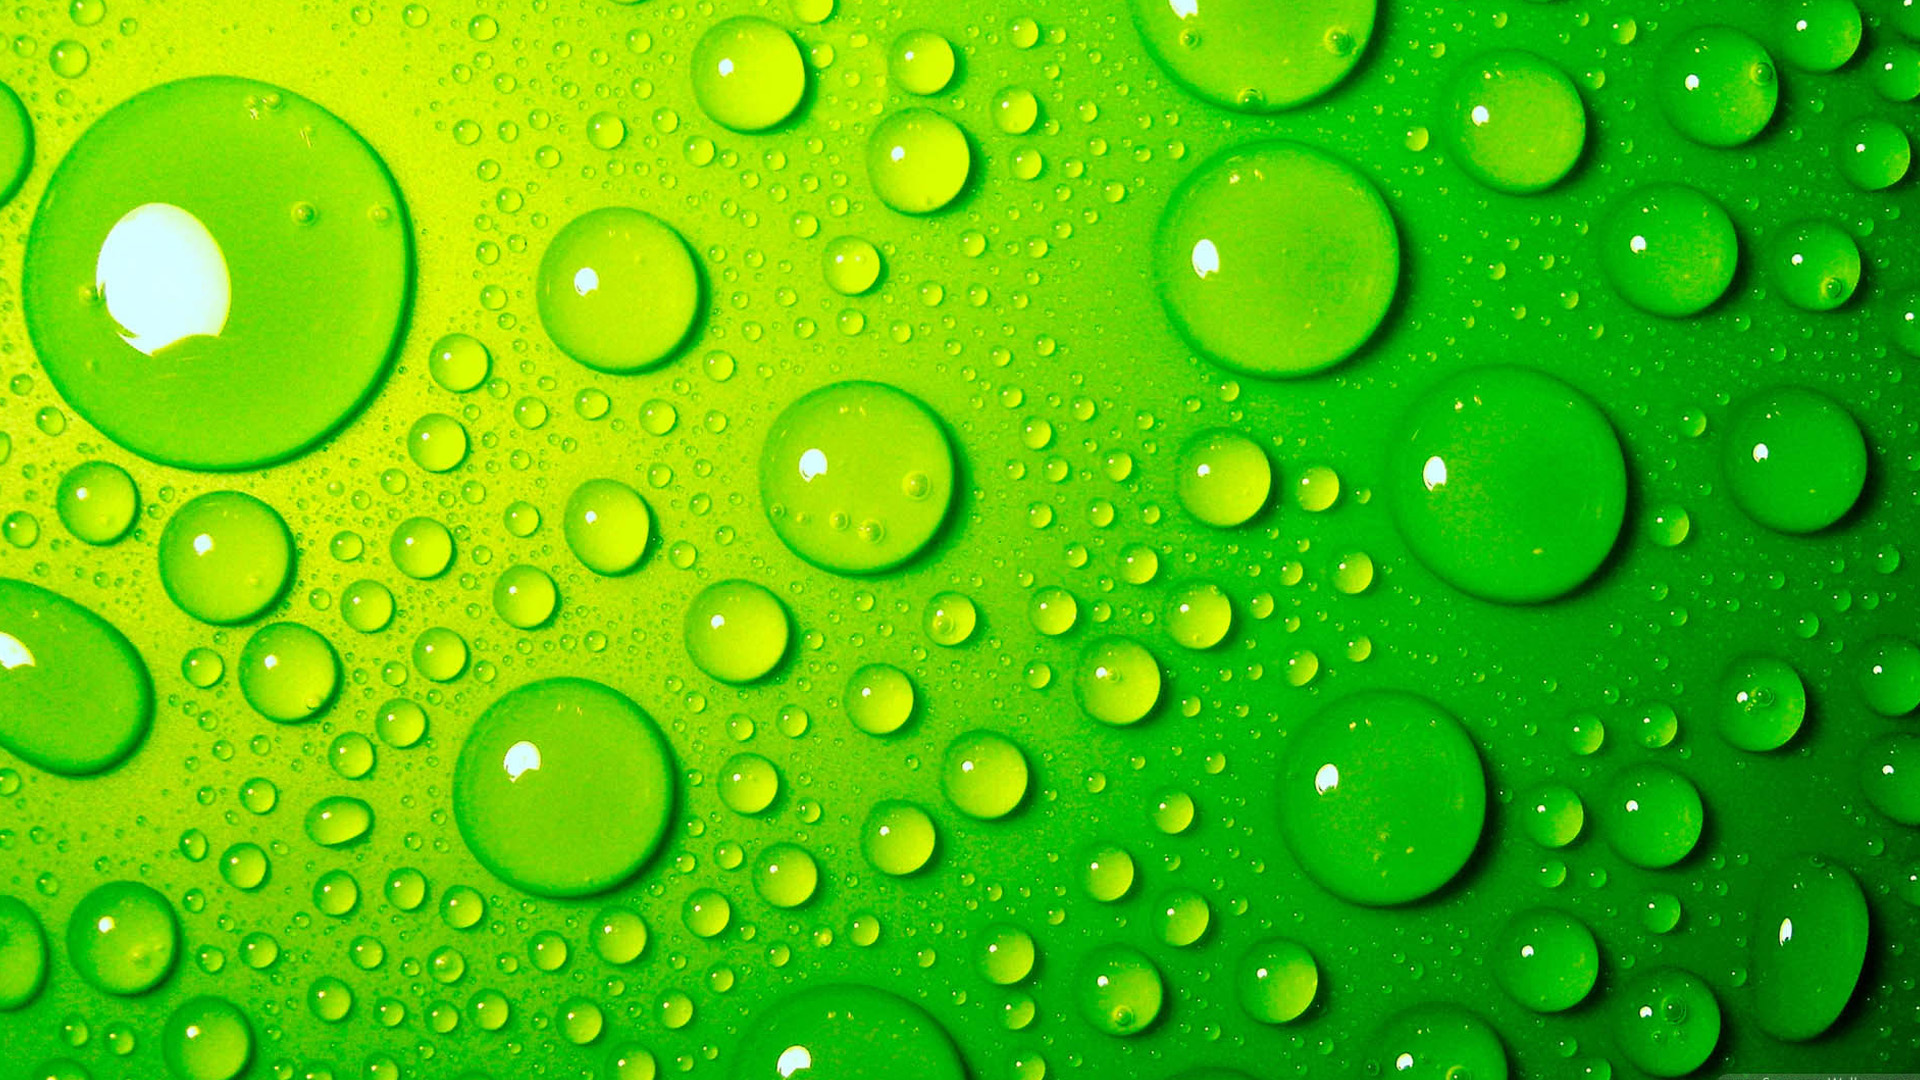 Seductive Green Water Droplets Background Wallpaper Background